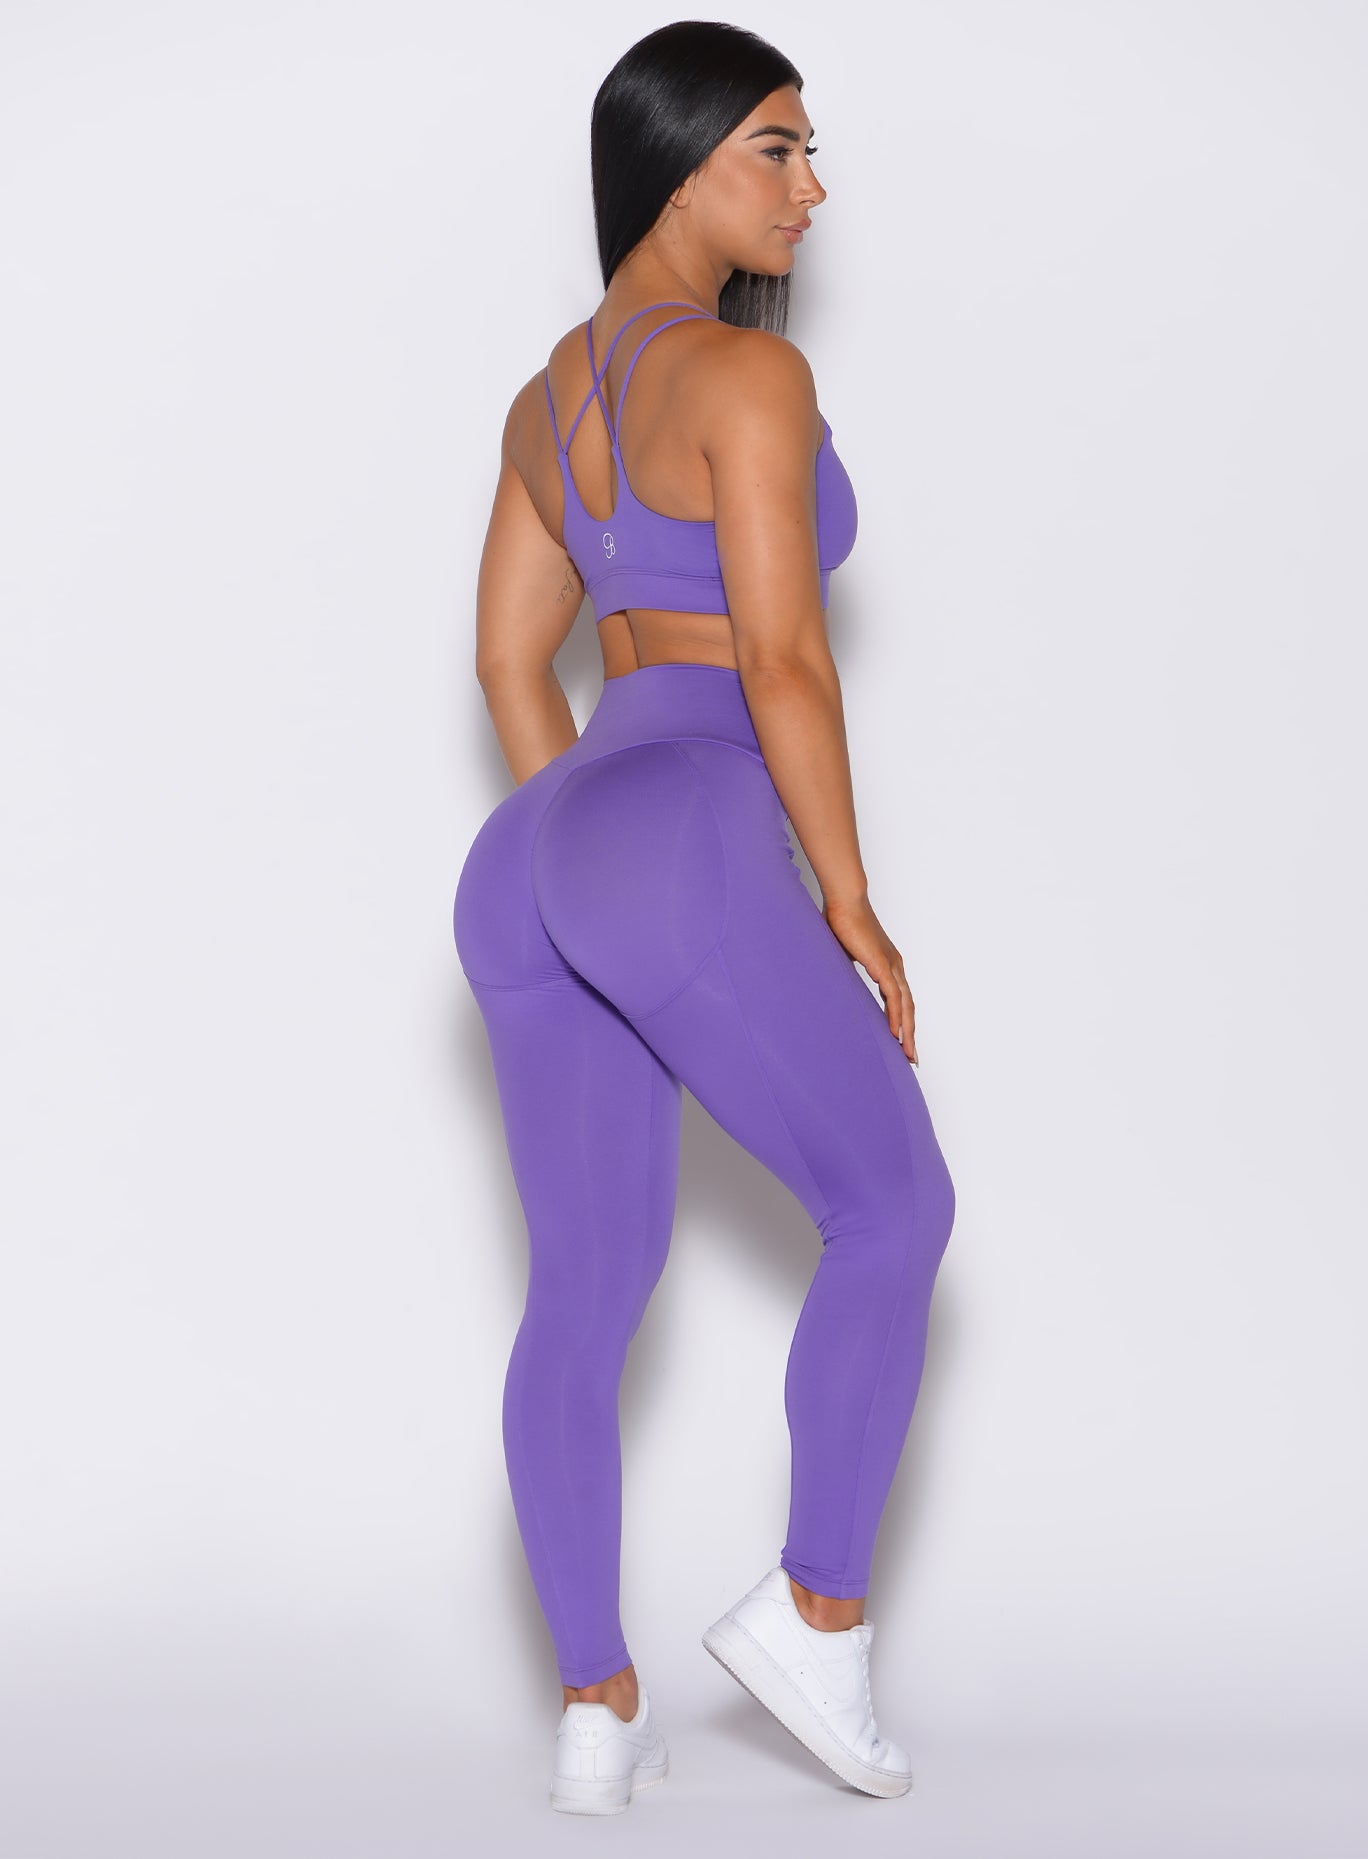 Right side profile view of a model wearing our shape leggings in royal purple color along with the matching bra